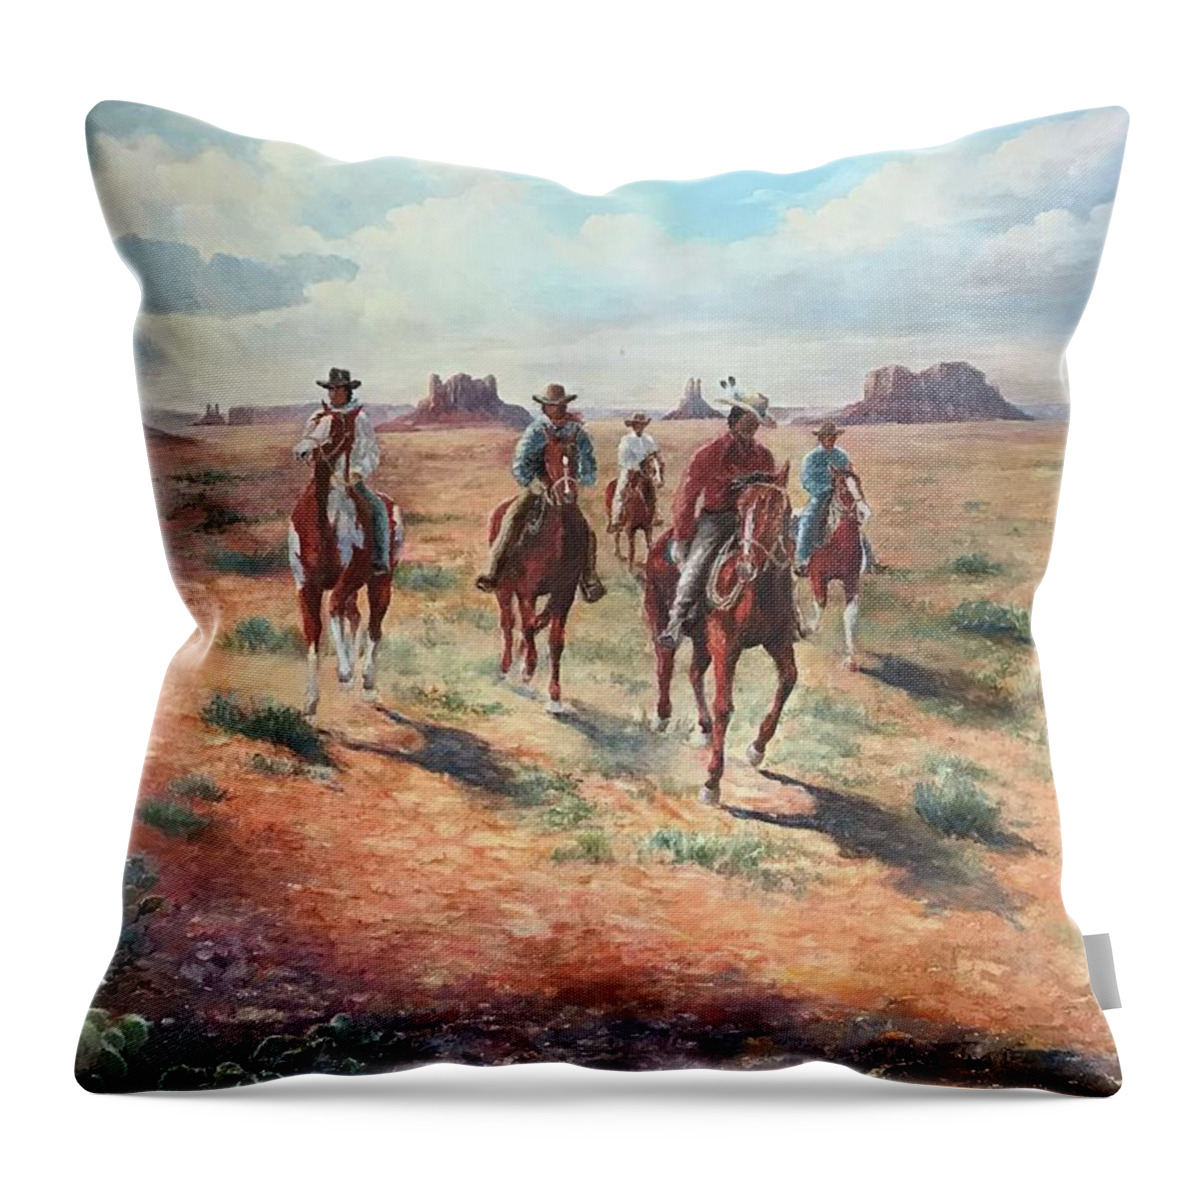 Cowboy Throw Pillow featuring the painting Navajo Riders by ML McCormick